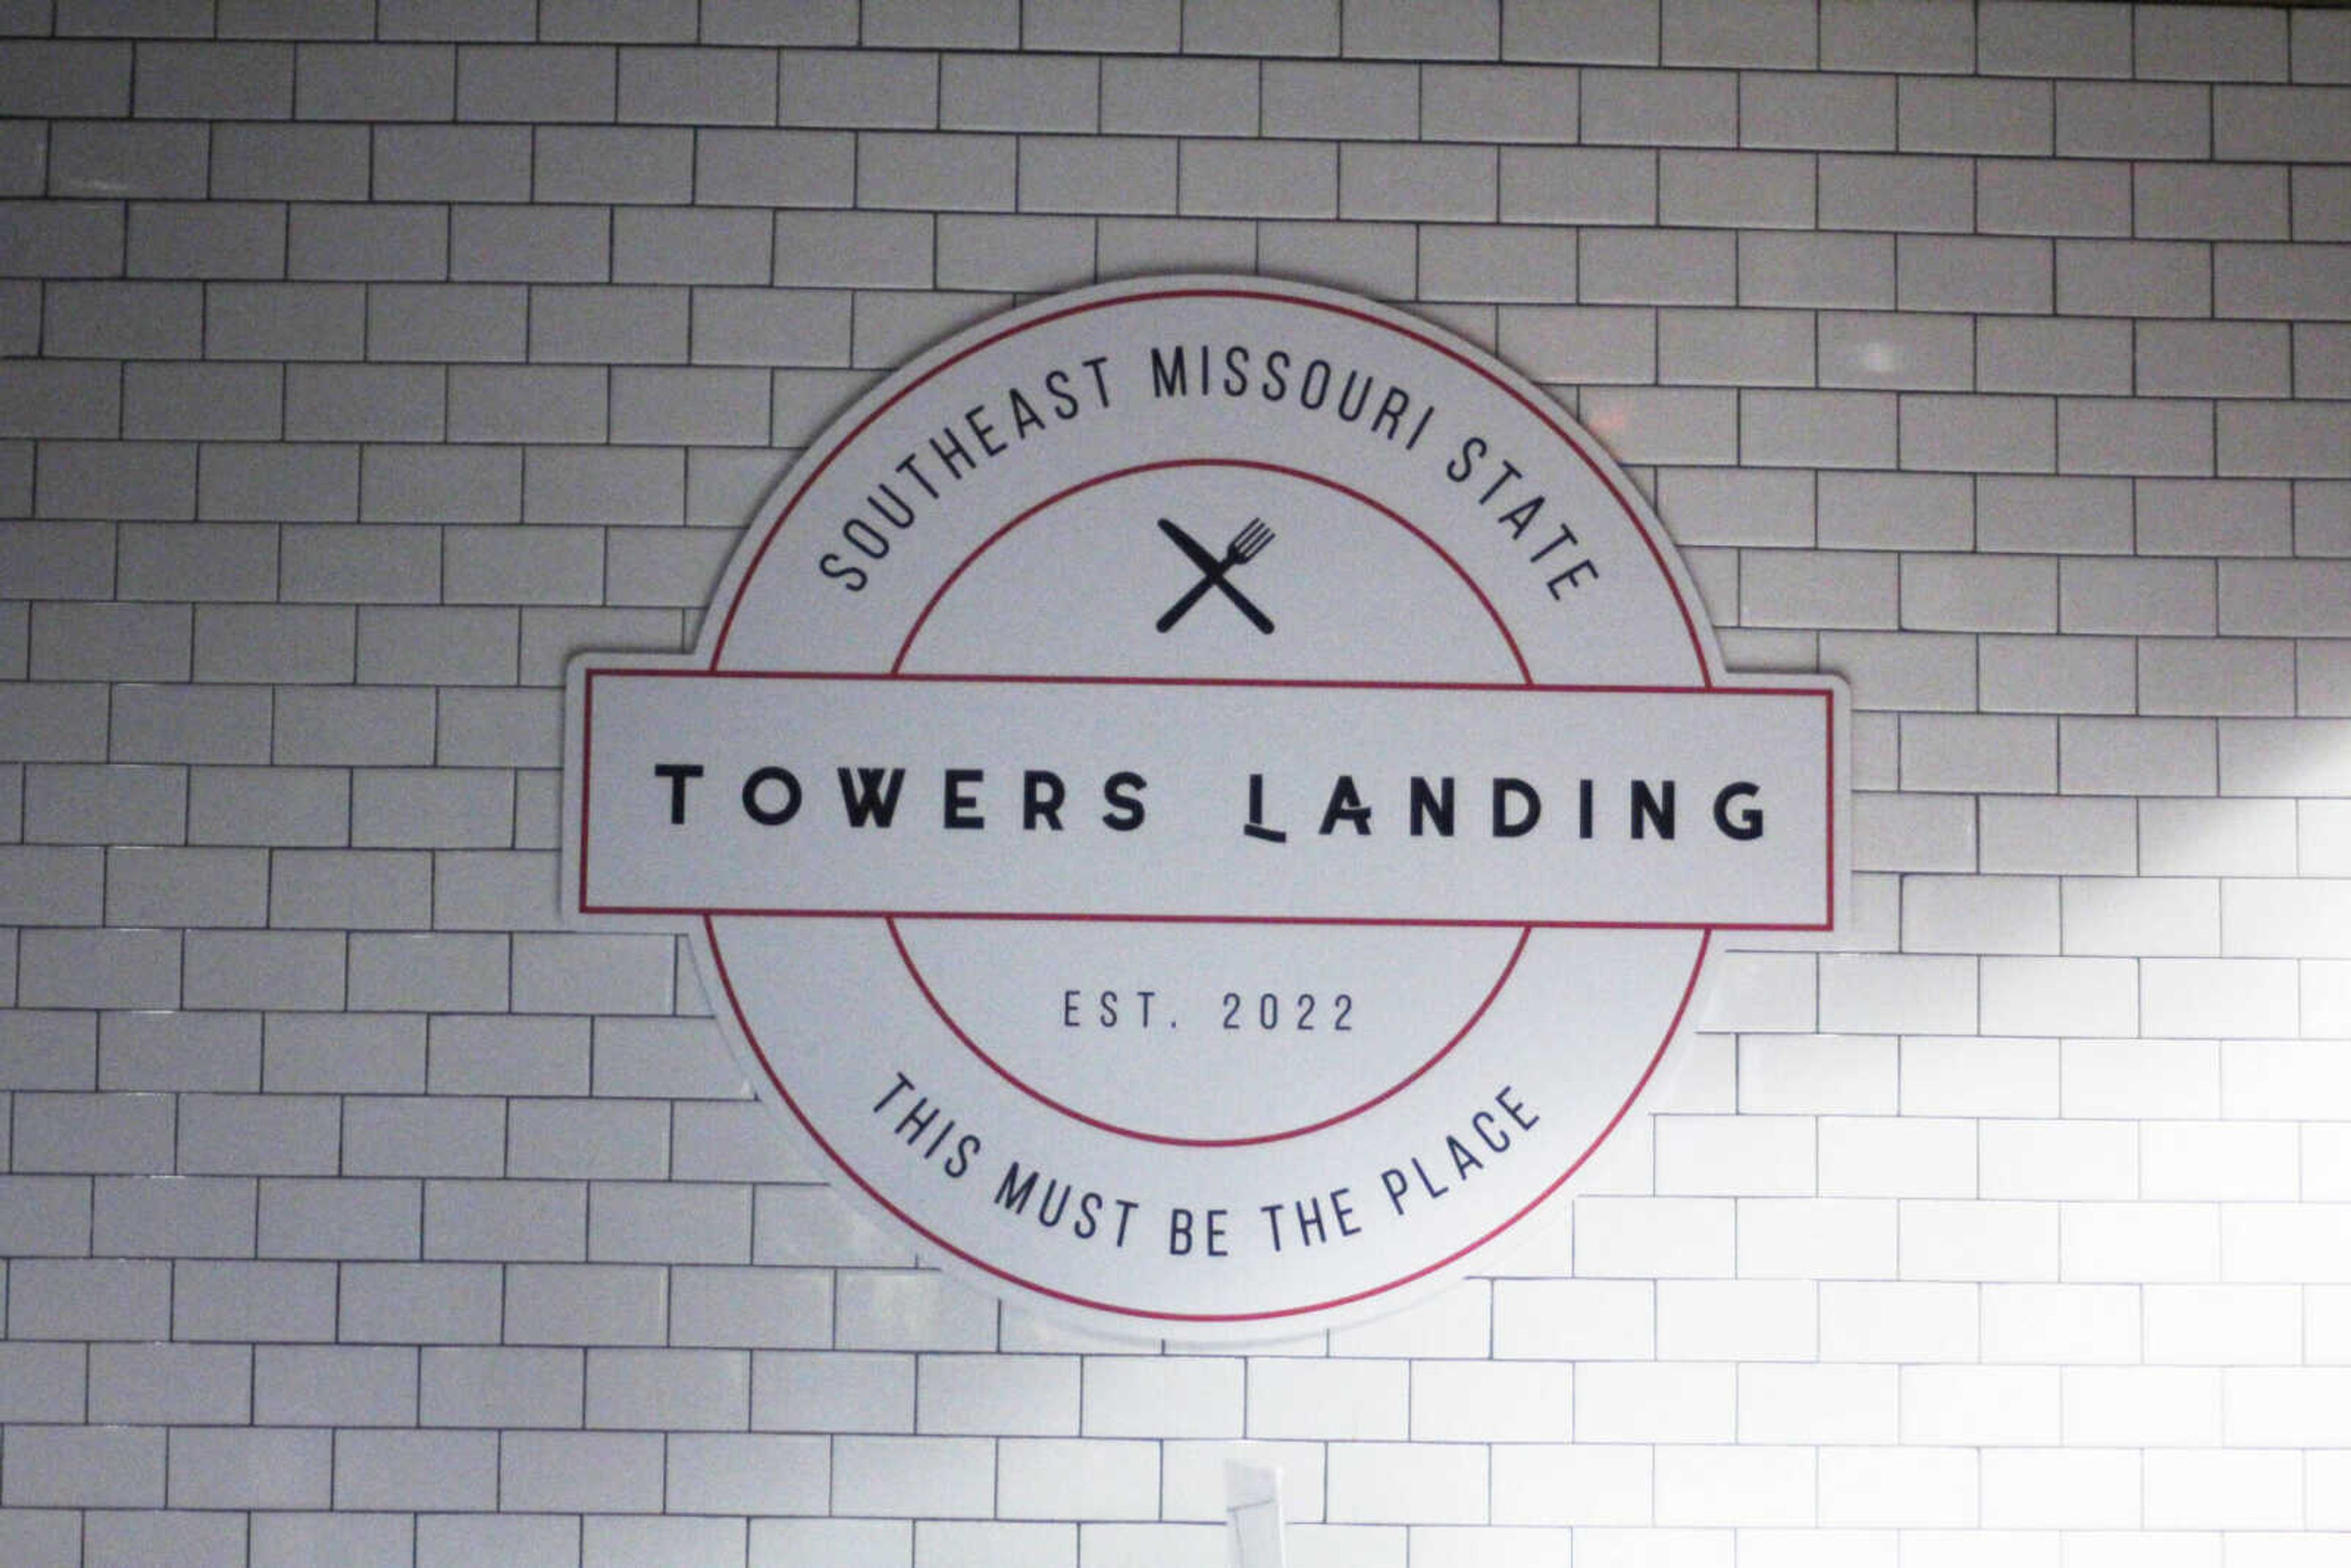 The sign leading to Towers Landing hangs on the wall welcoming students.